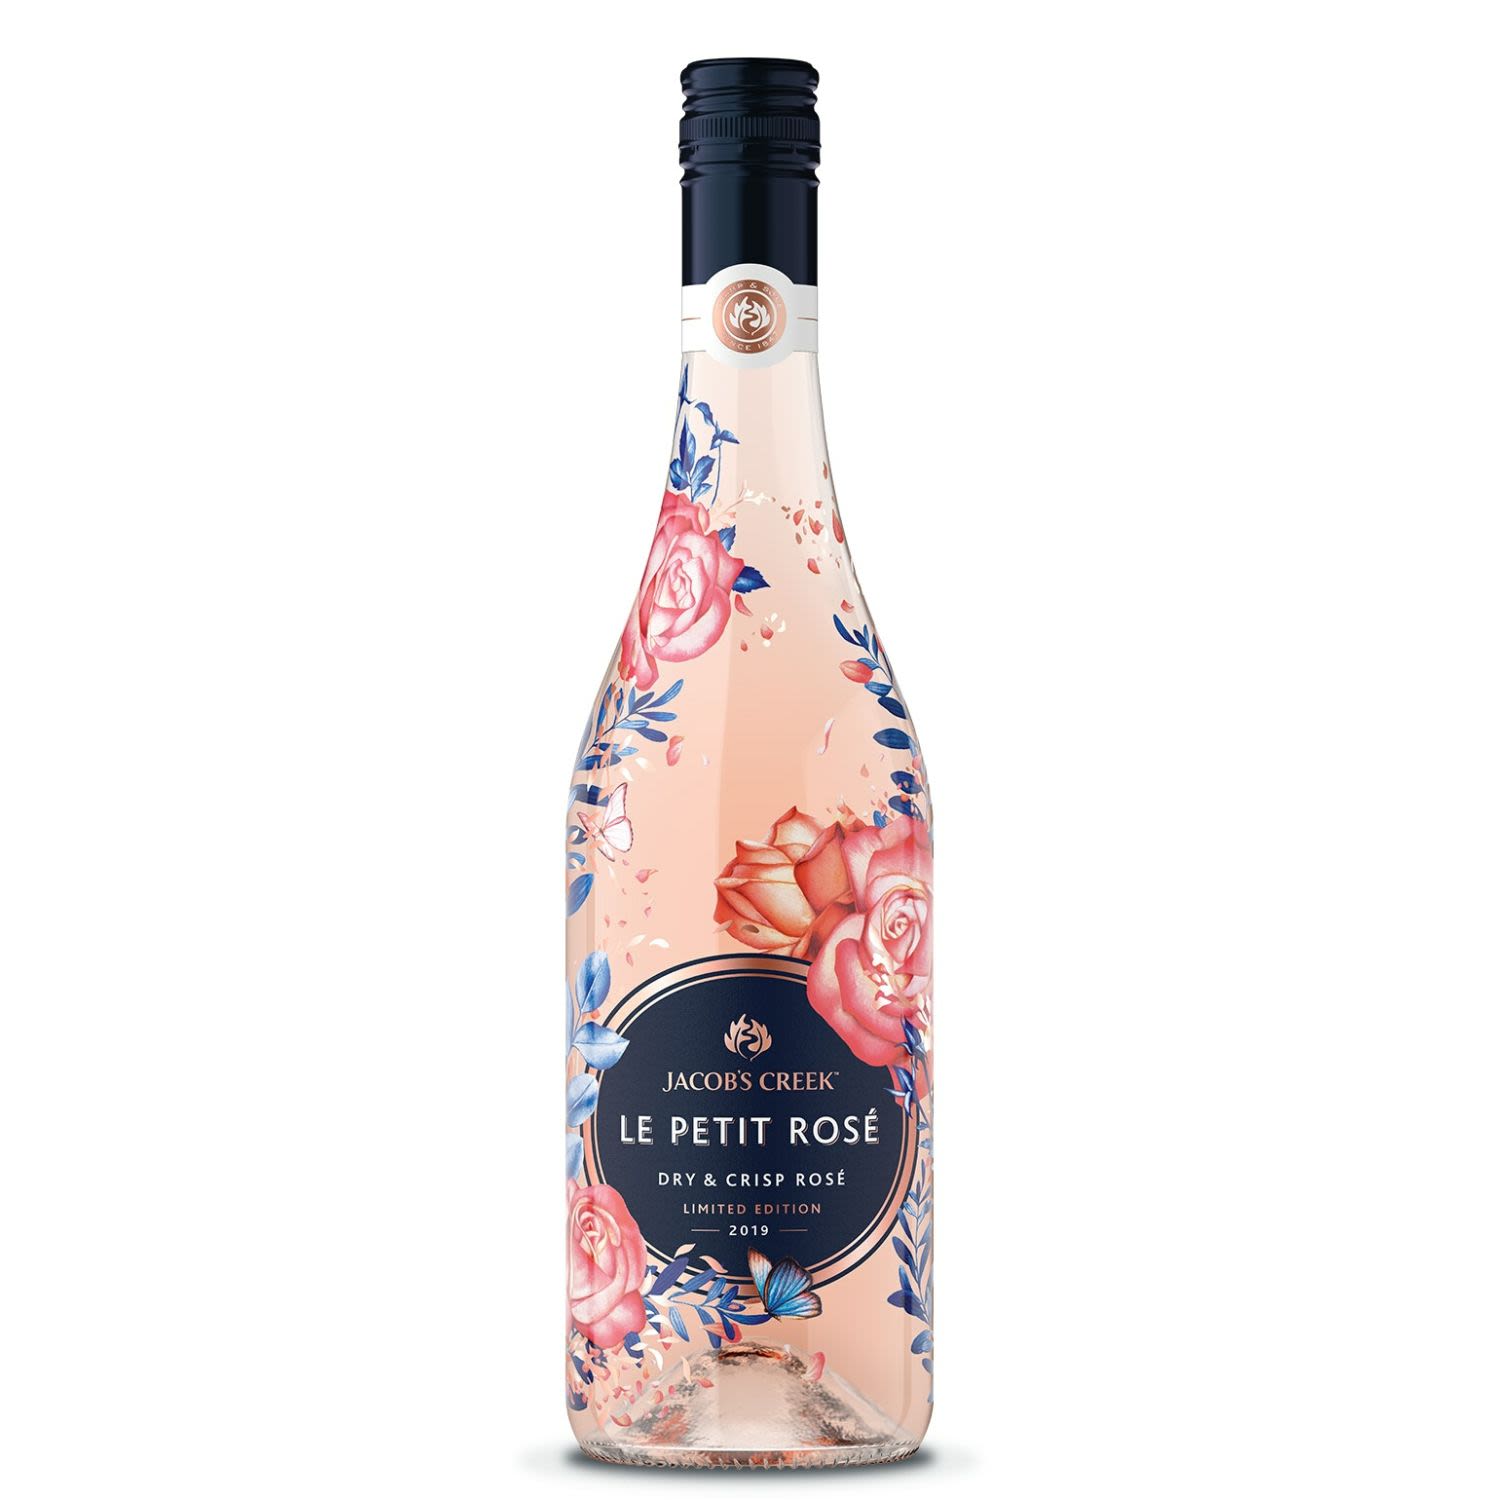 A fresh and delicate Rosé showcasing a modern Australian approach and premium fruit from selected blocks of Pinot Noir, Grenache and Mataro.<br /> <br />Alcohol Volume: 12.50%<br /><br />Pack Format: Bottle<br /><br />Standard Drinks: 7.4<br /><br />Pack Type: Bottle<br /><br />Country of Origin: Australia<br /><br />Region: Adelaide Hills<br /><br />Vintage: Non Vintage<br />